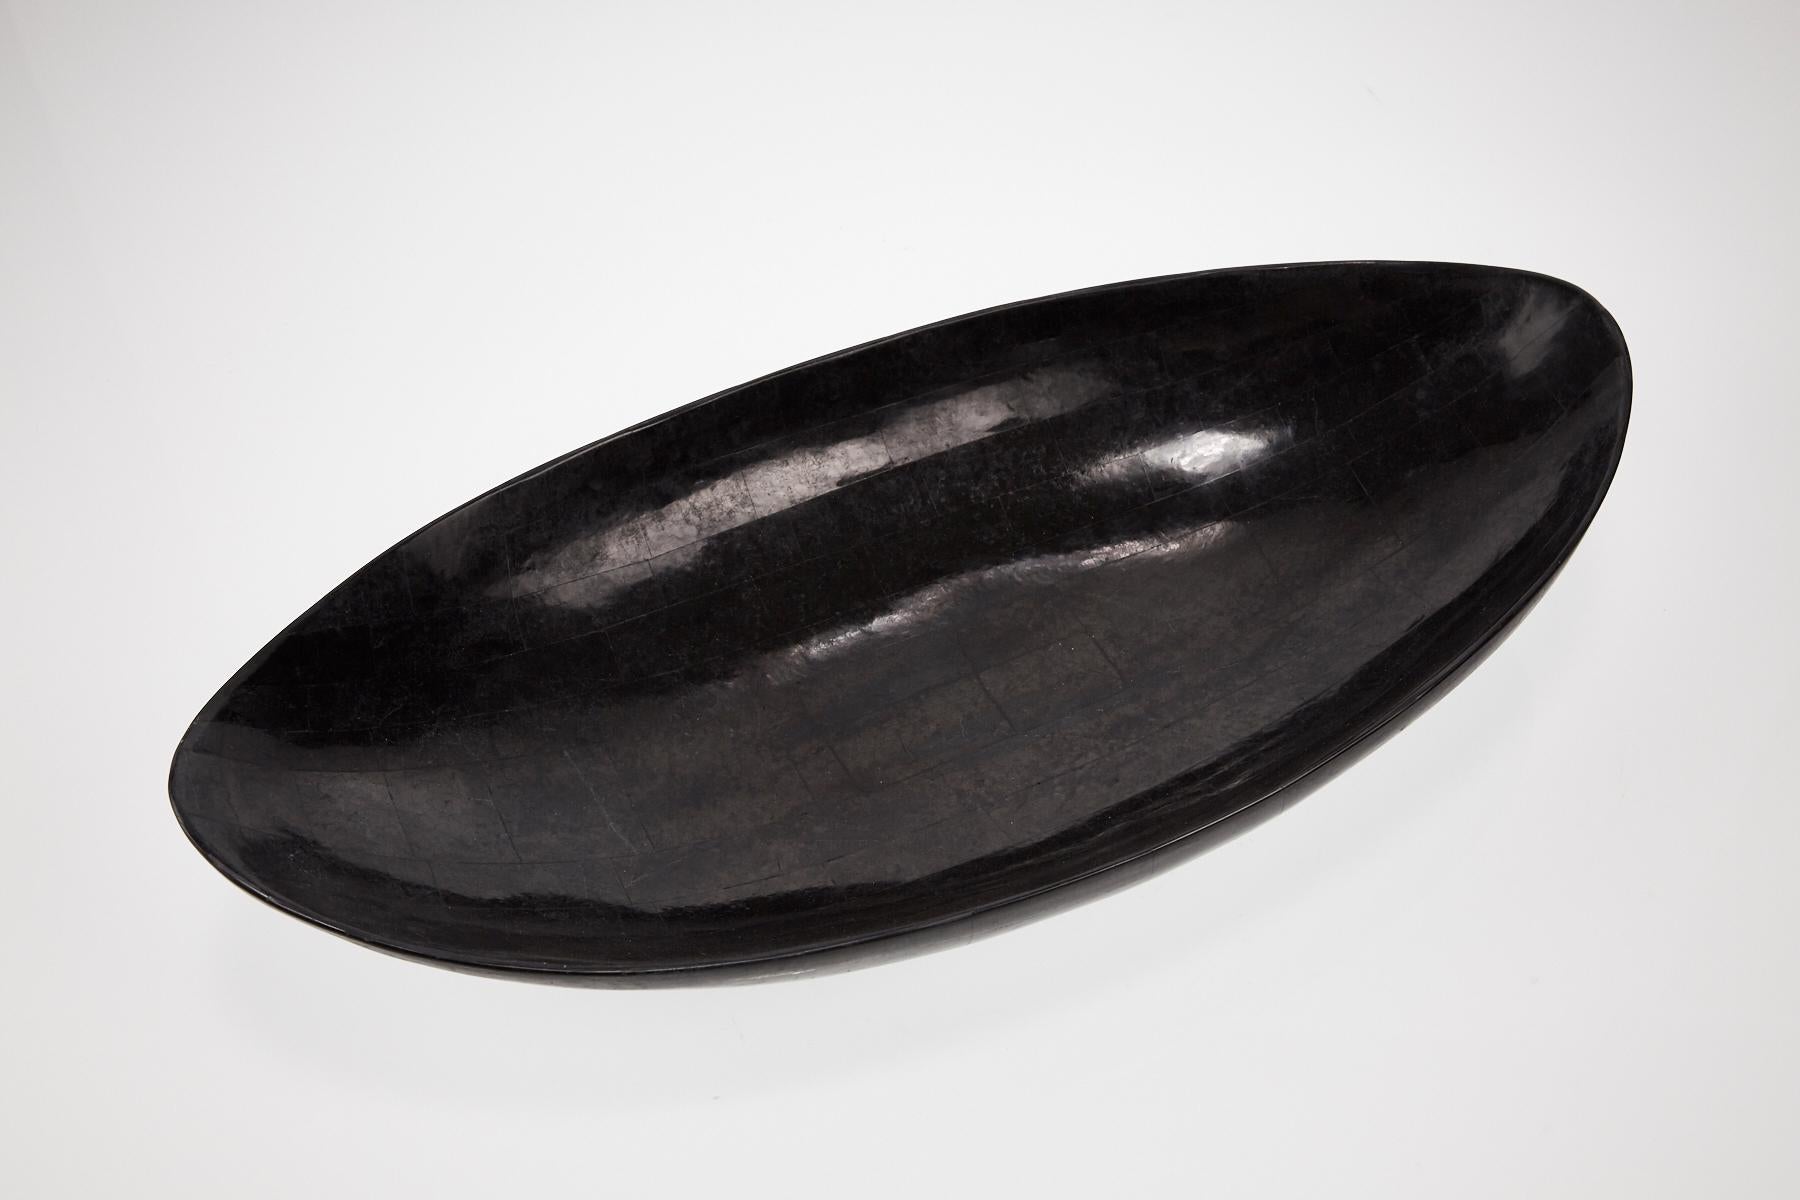 Late 20th Century Postmodern Black Tessellated Stone Oval Decorative Bowl or Platter, 1990s For Sale